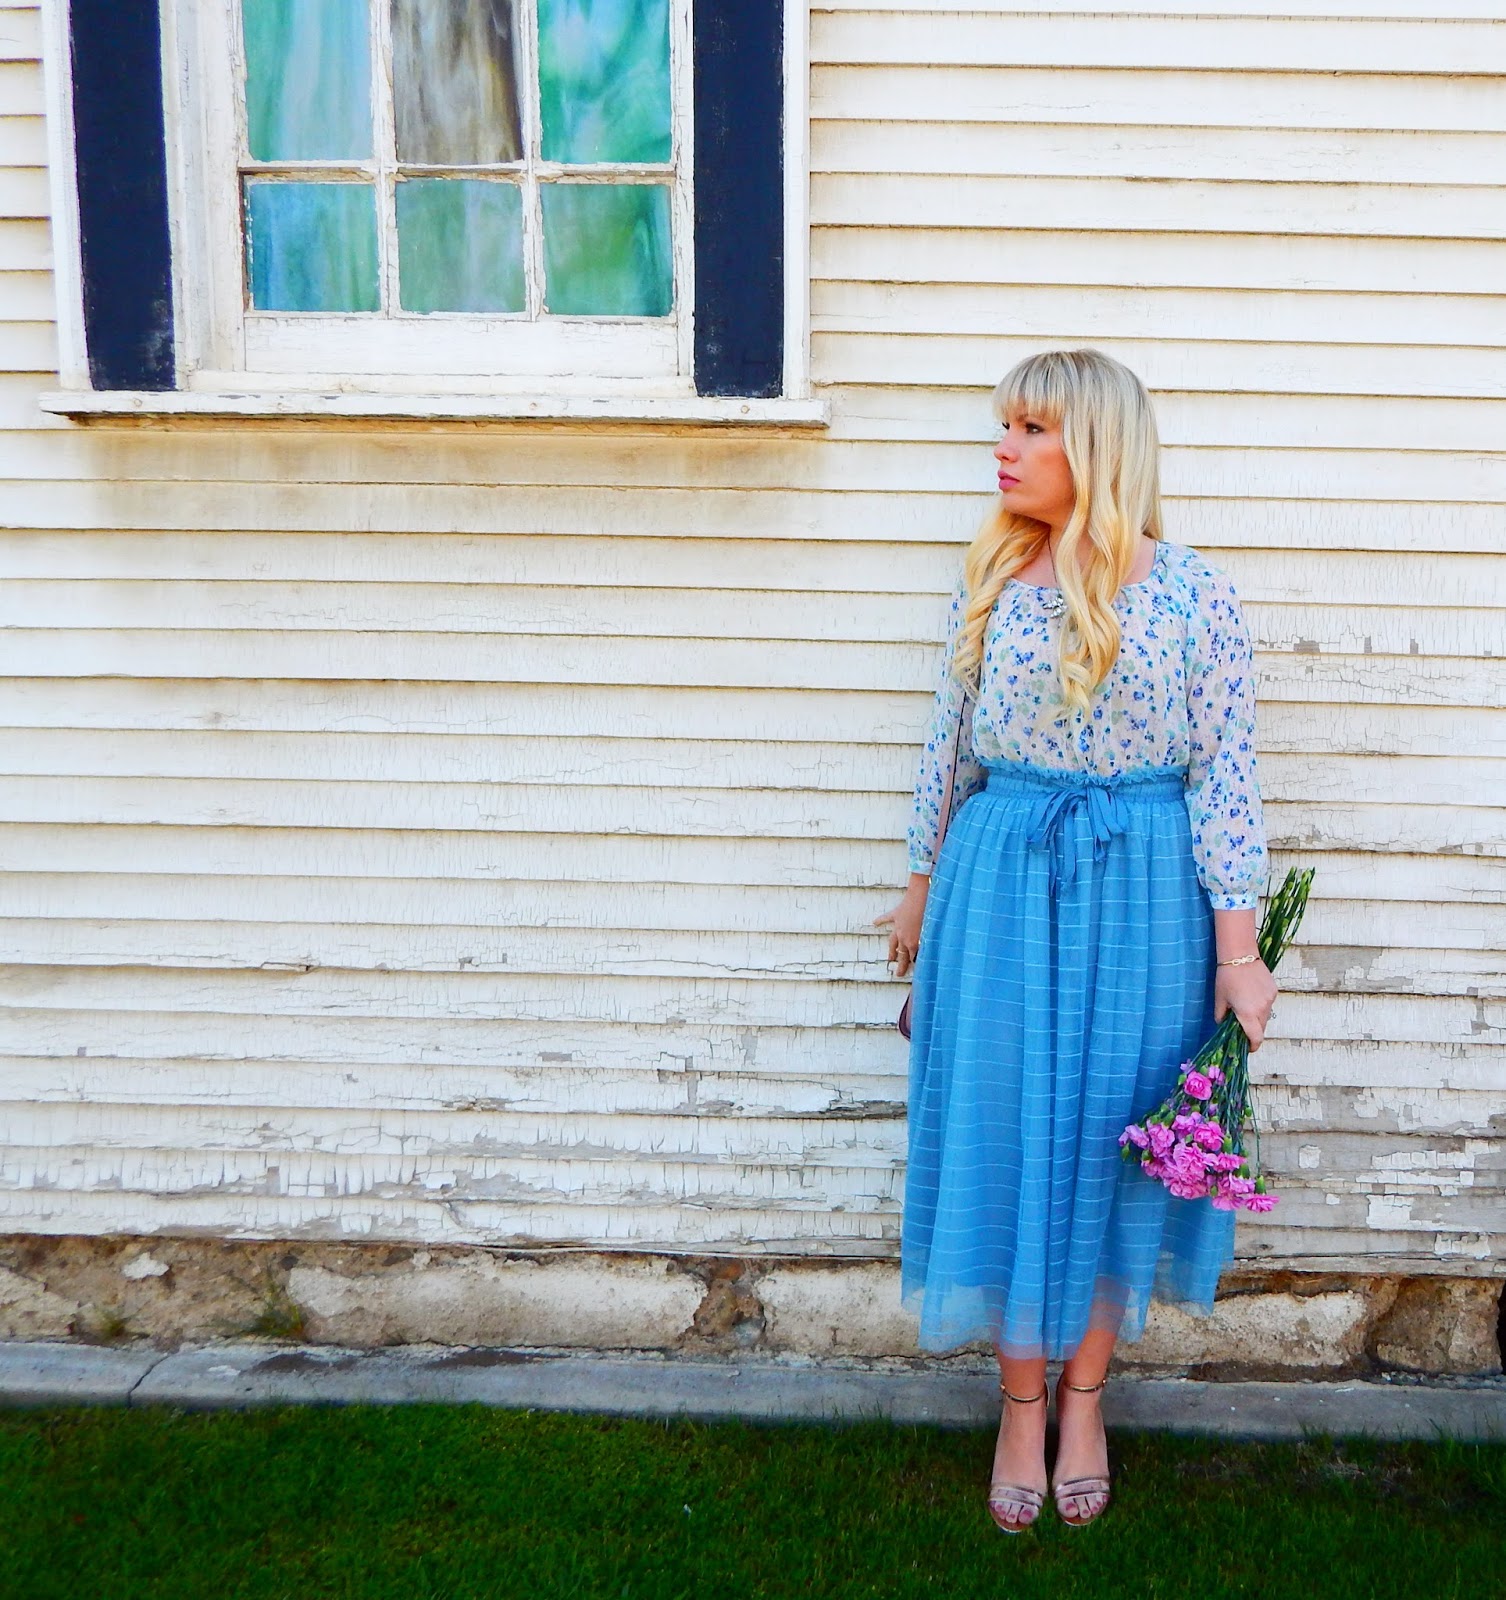 Blue Tulle Skirt Outfit